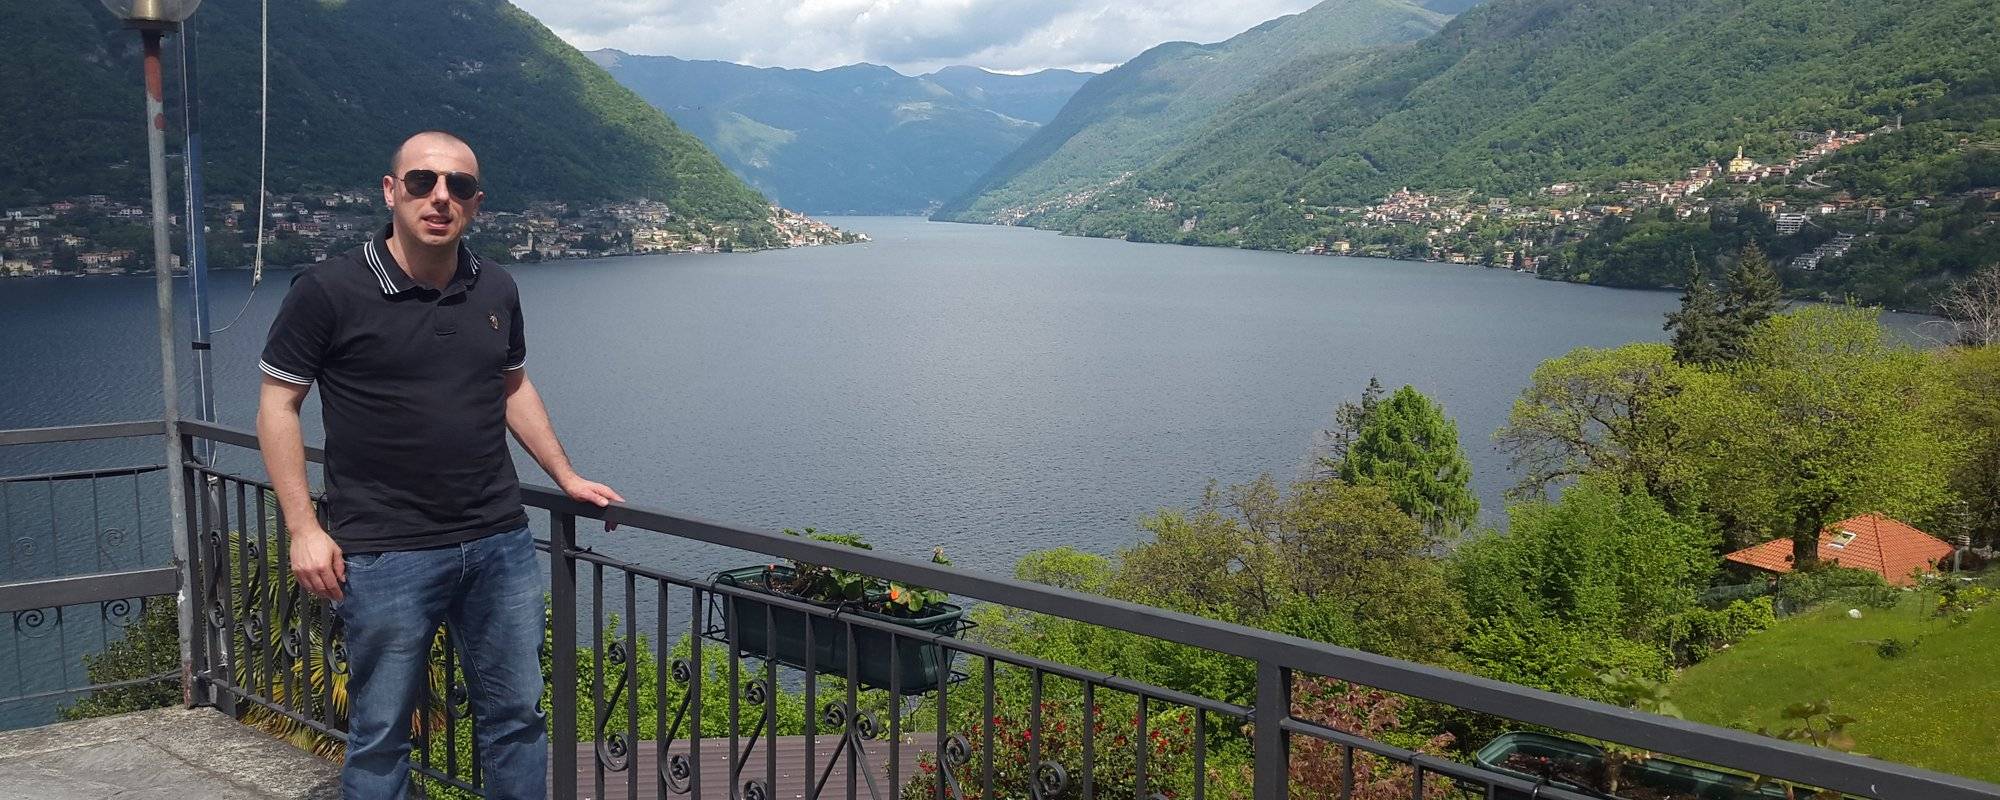 One day trip by car between Como and Lugano lakes (Italy -Switzerland)